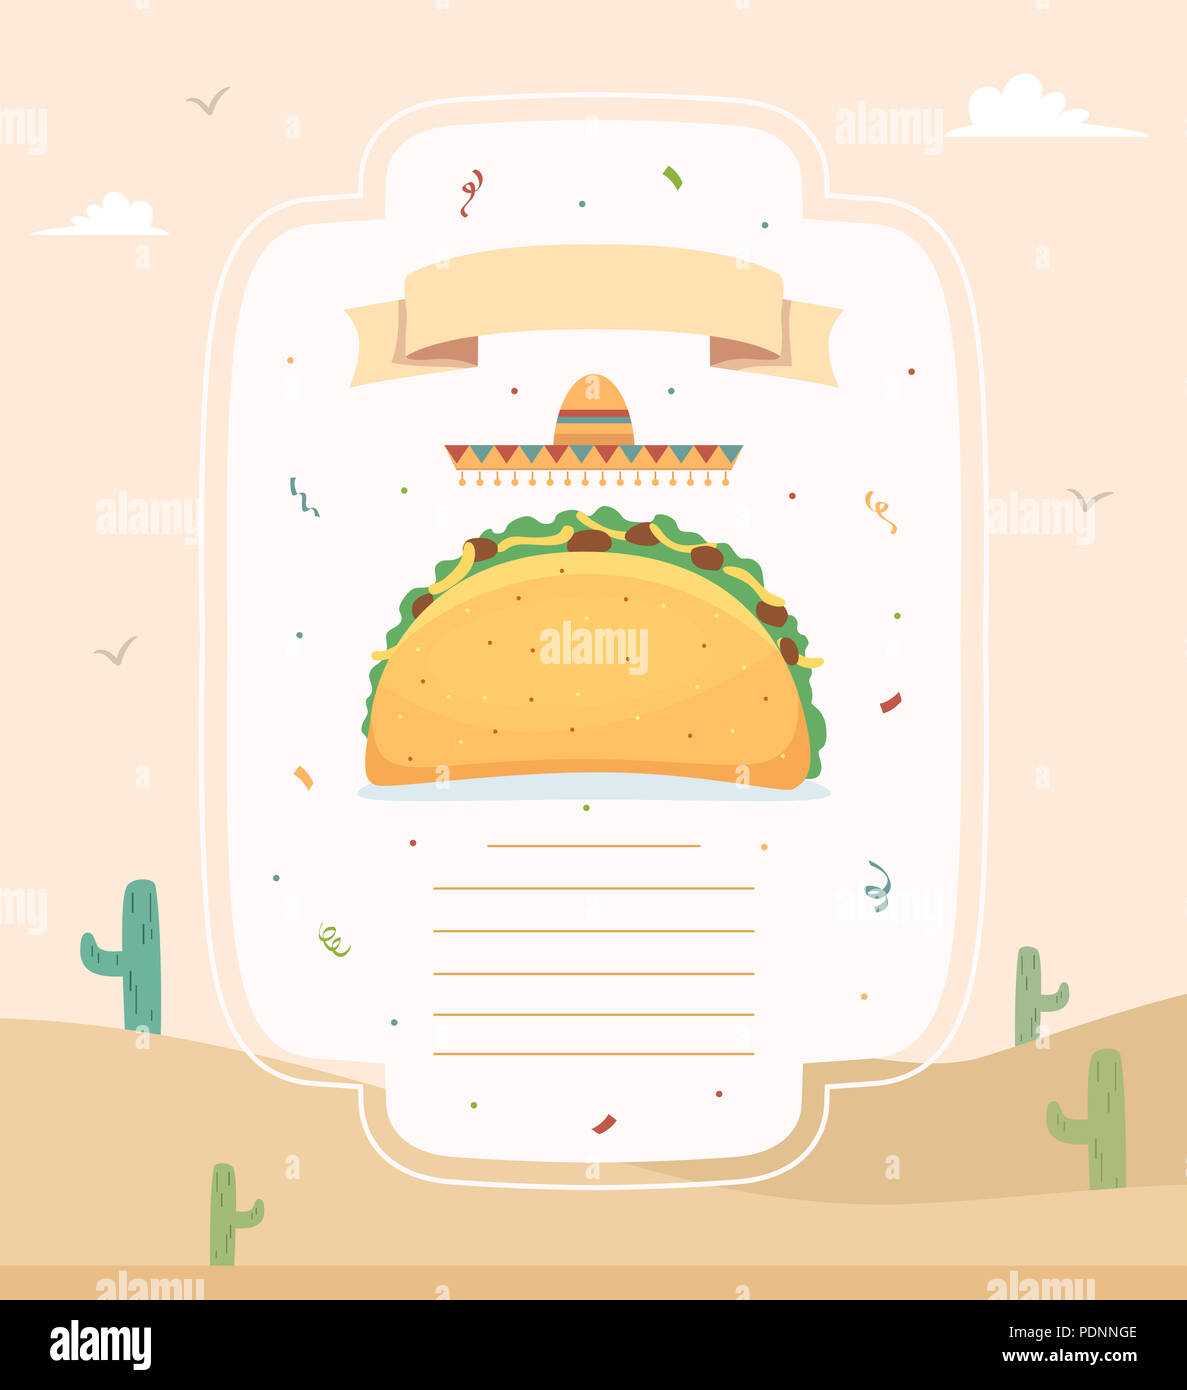 Illustration of a Taco with Mexican Hat, Ribbon and Space for Text Against a Desert Background with Sand and Cactus Stock Photo